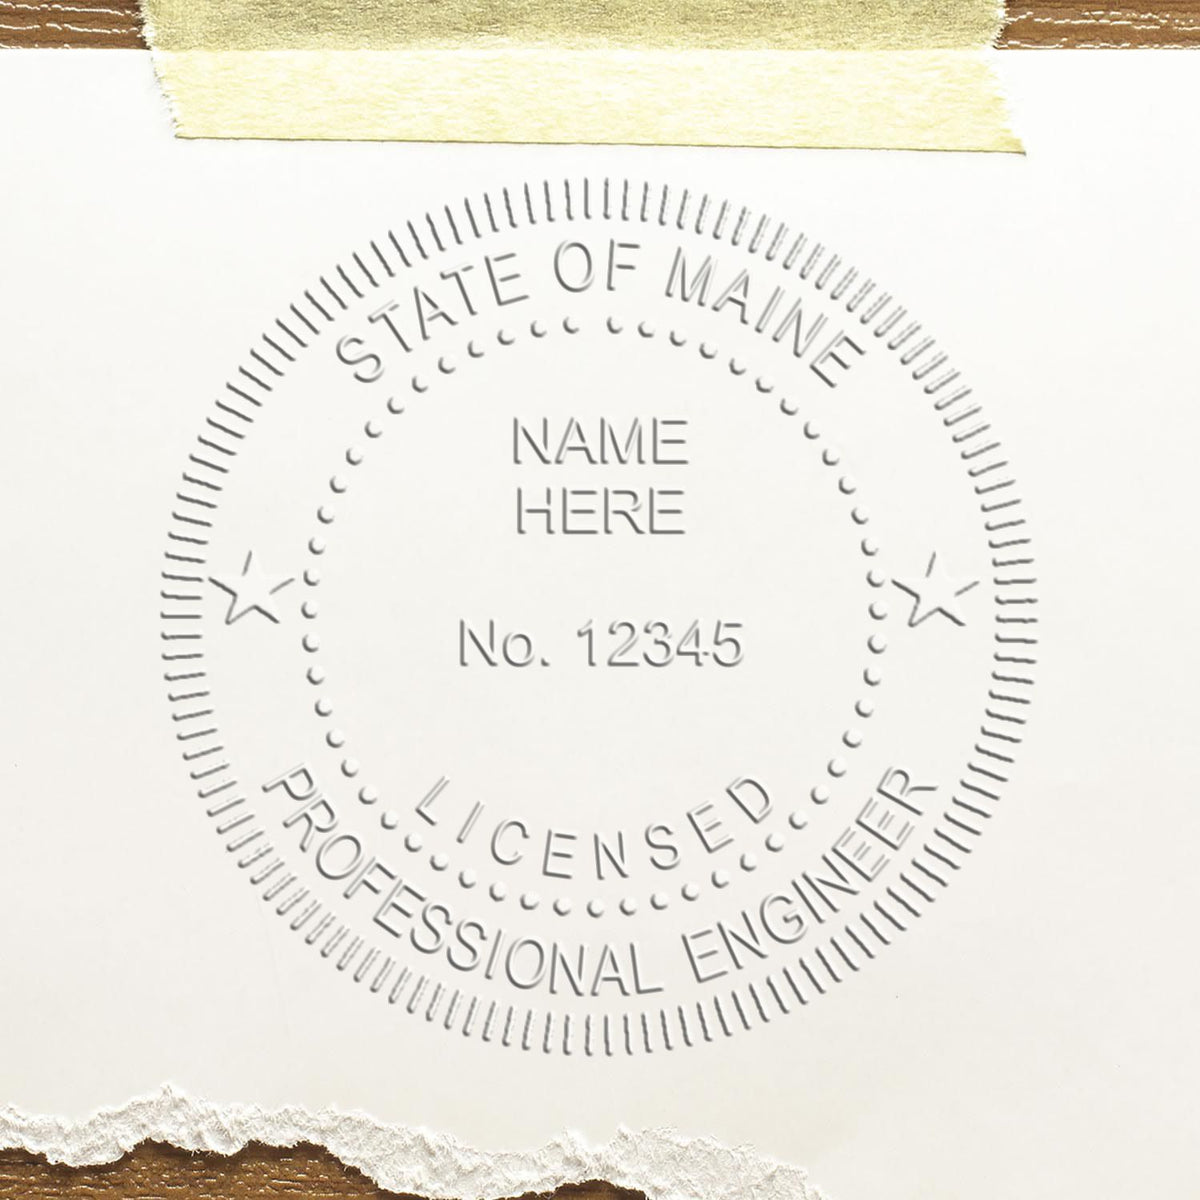 The Heavy Duty Cast Iron Maine Engineer Seal Embosser stamp impression comes to life with a crisp, detailed photo on paper - showcasing true professional quality.